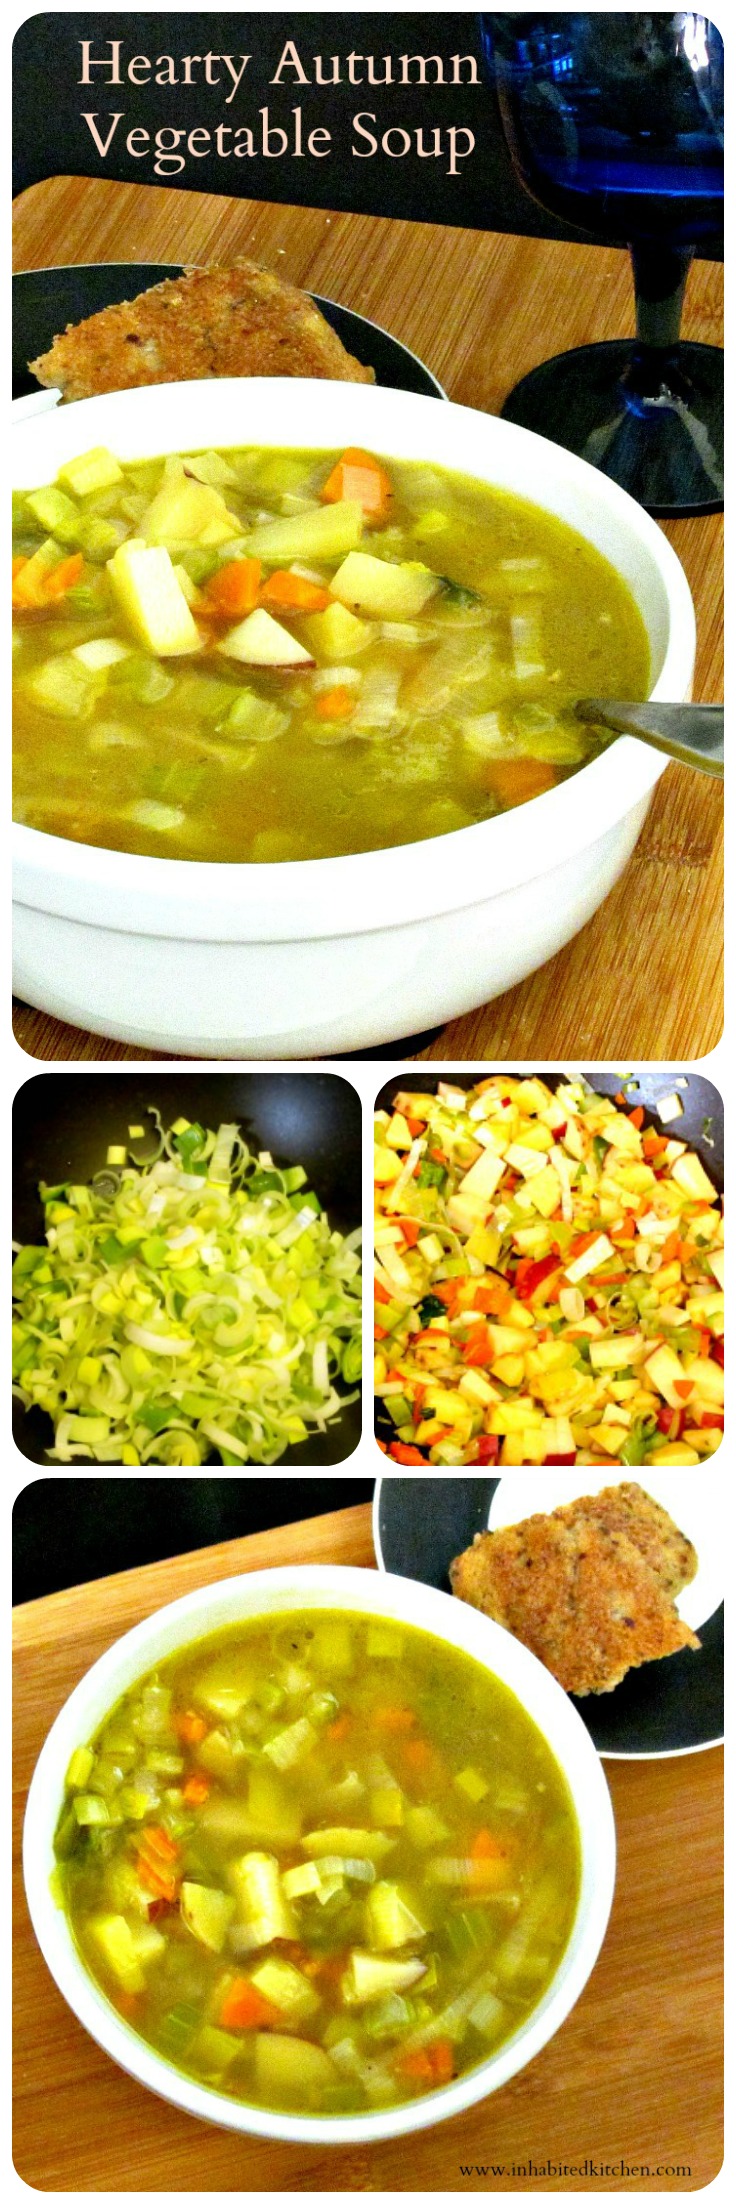 Take an assortment of aromatic vegetables, add potatoes and broth, and make a hearty vegetable soup! 